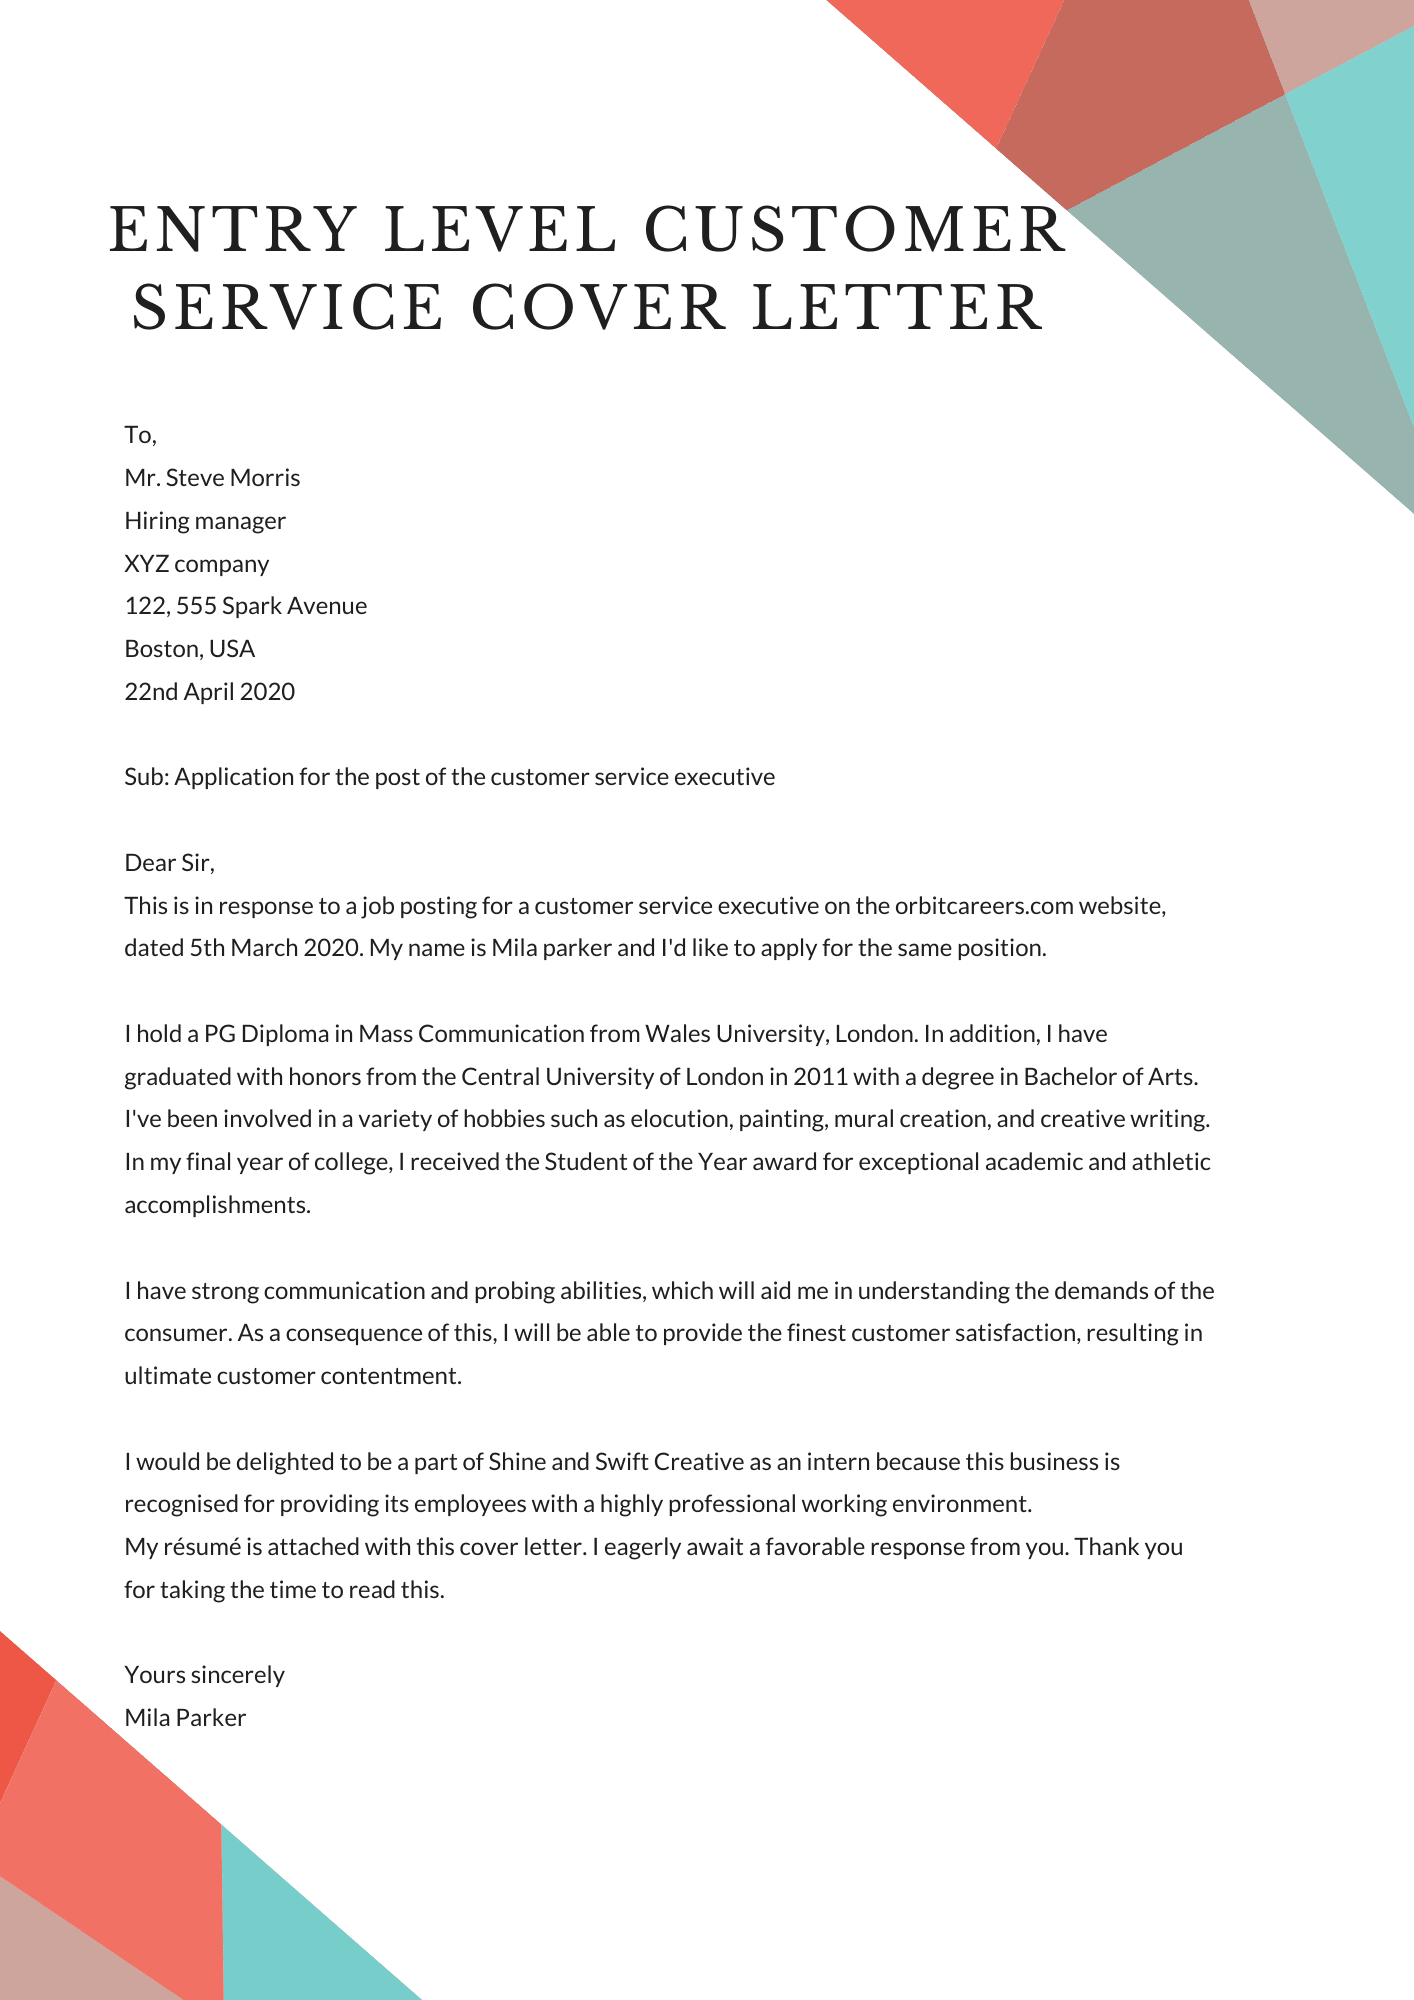 application letter for customer service executive